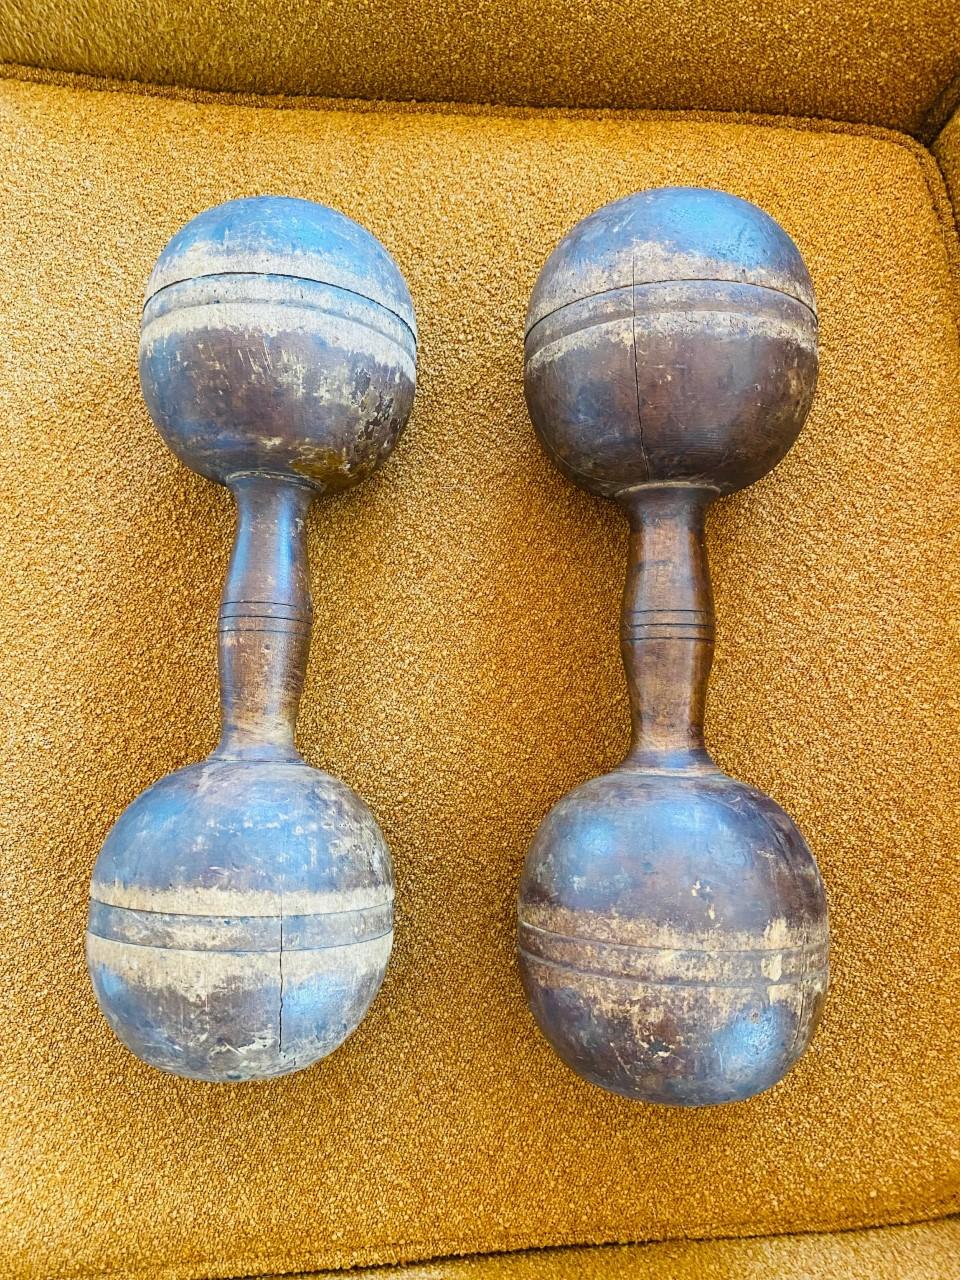 Antique 1900s Pair of Wooden Hand Weights 3